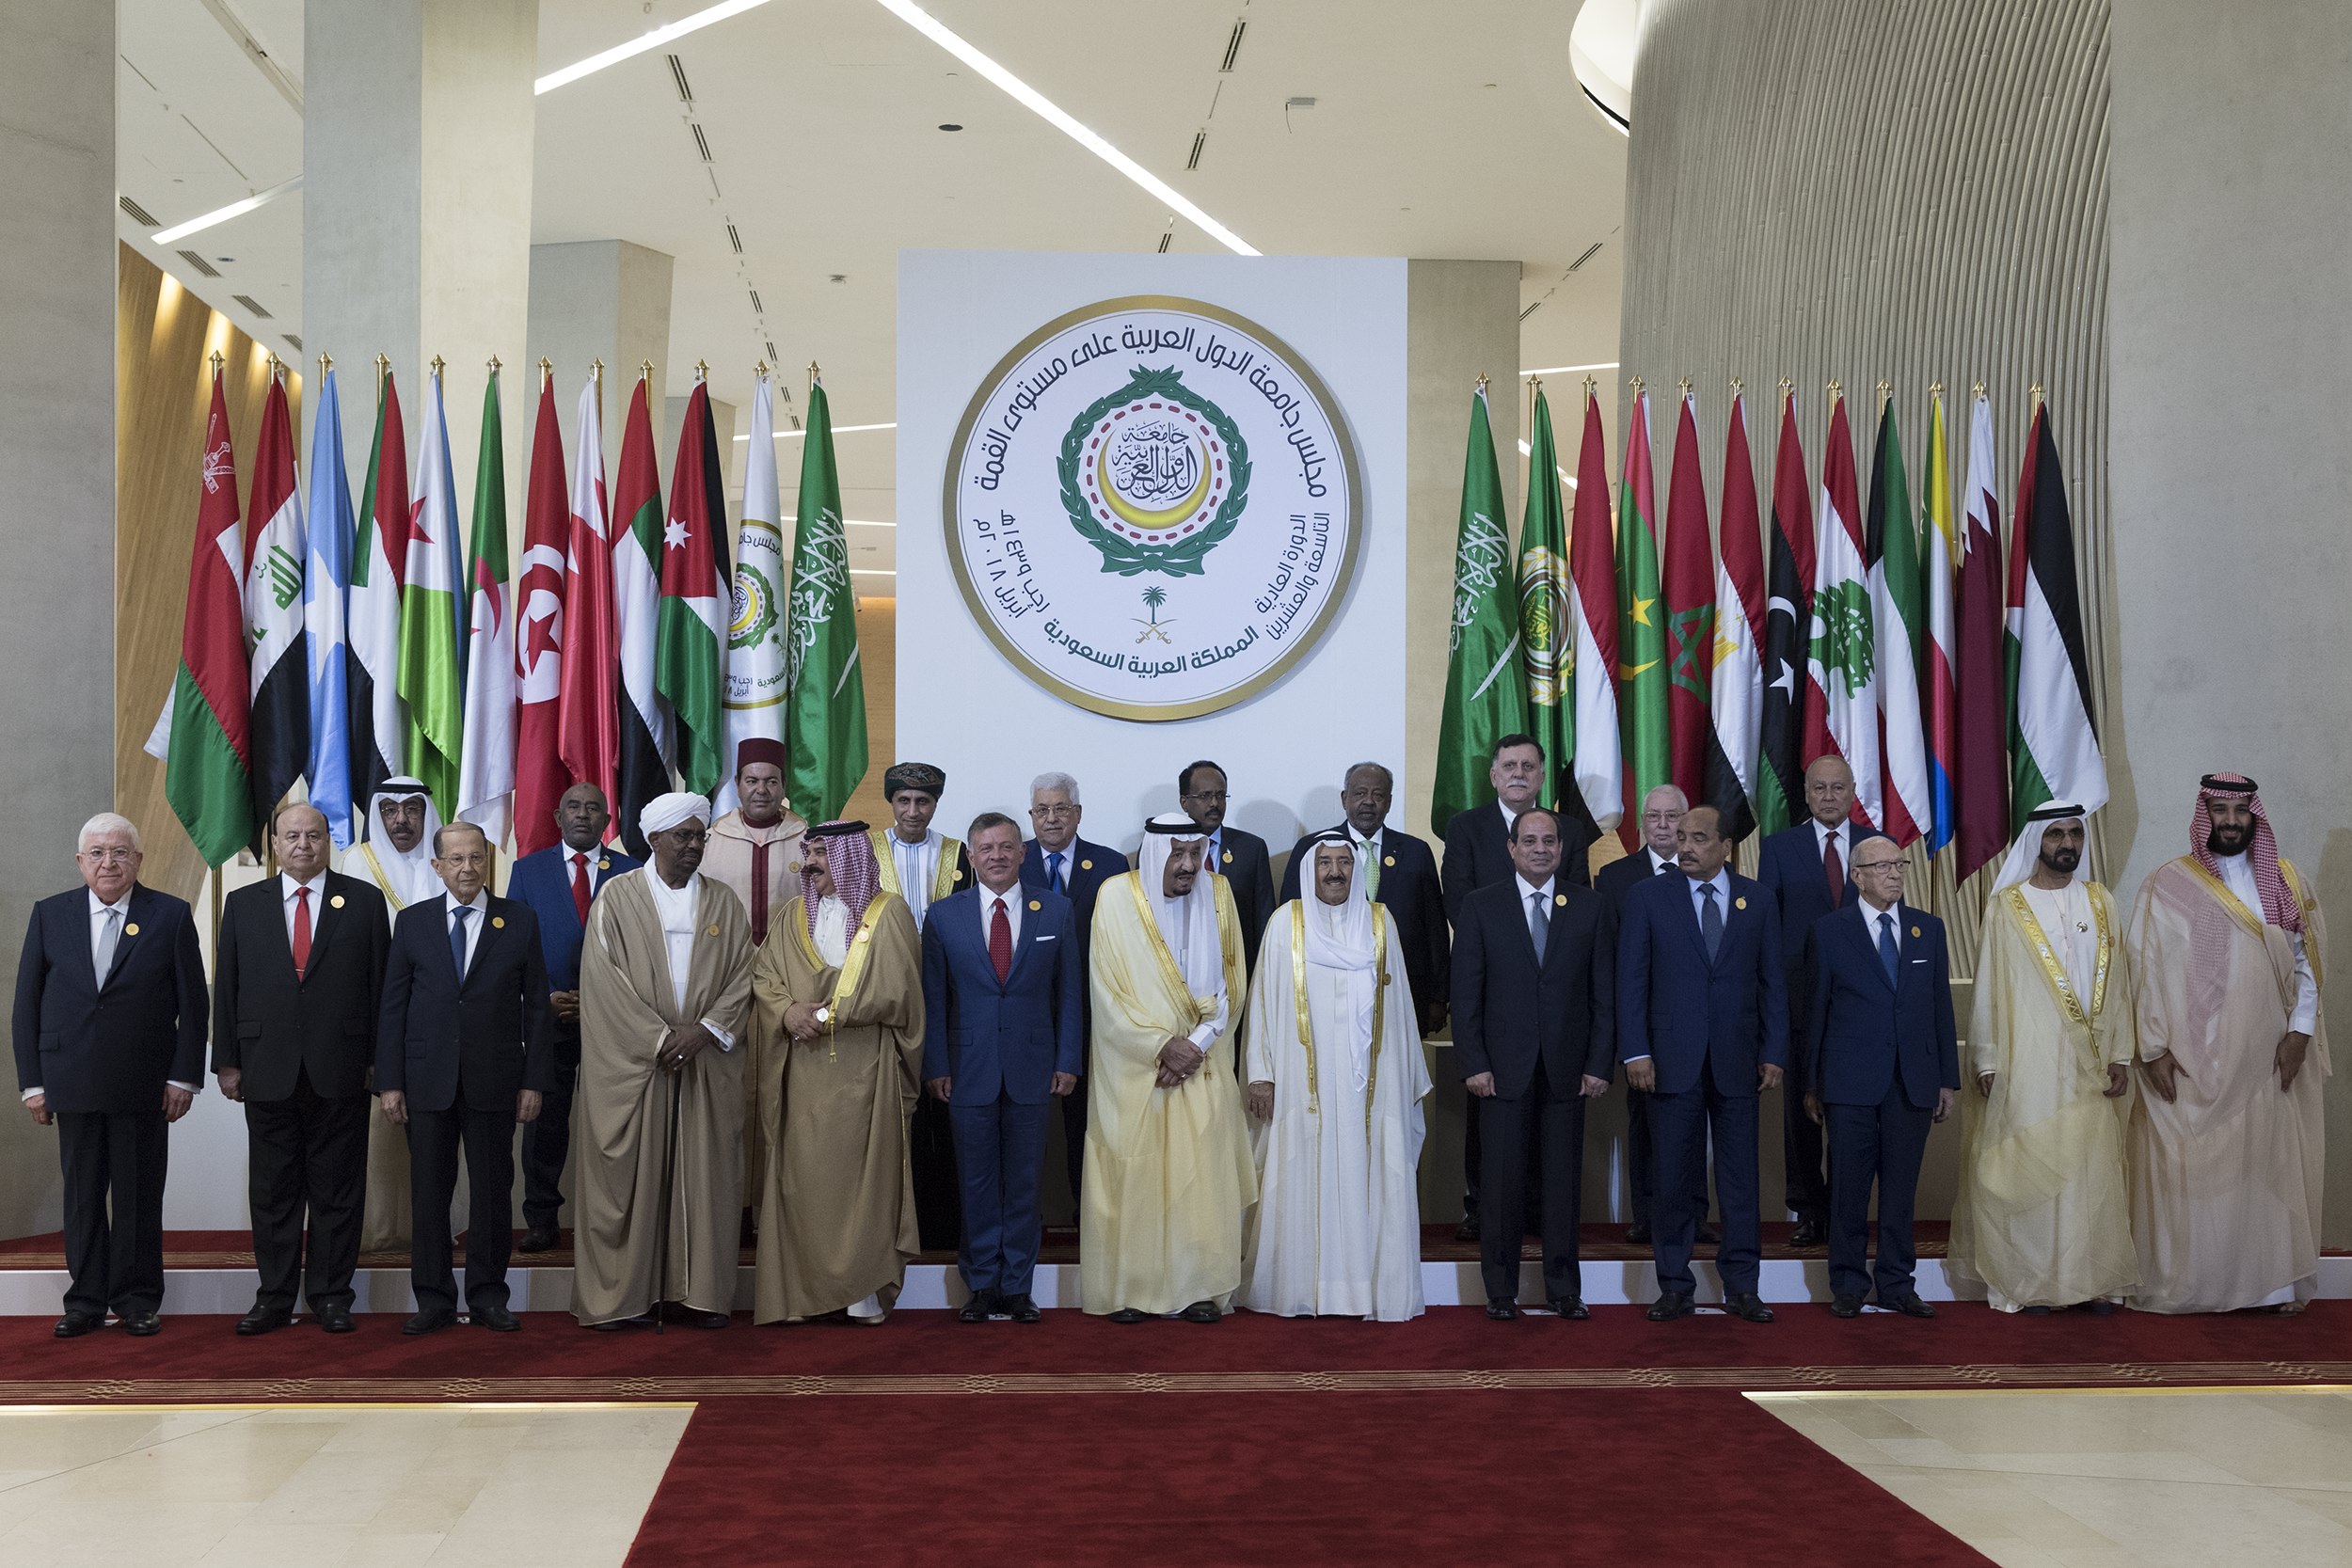 epa06671035 A handout photo made available by the Saudi Press Agency (SPA) shows Saudi King Salman bin Abdulaziz (C) posing for the summit group photo at the 29th Arab Summit, in Dhahran, Saudi Arabia, 15 April 2018. The summit is held one day after the US, France, and Britain launched strikes against Syria on 14 April in response to Syria's suspected chemical weapons attack. Arab leaders are also expected to discuss tension with Iran, Palestinian issue, and developments in Yemen, Lebanon and Libya.  EPA/SAUDI PRESS AGENCY HANDOUT  HANDOUT EDITORIAL USE ONLY/NO SALES